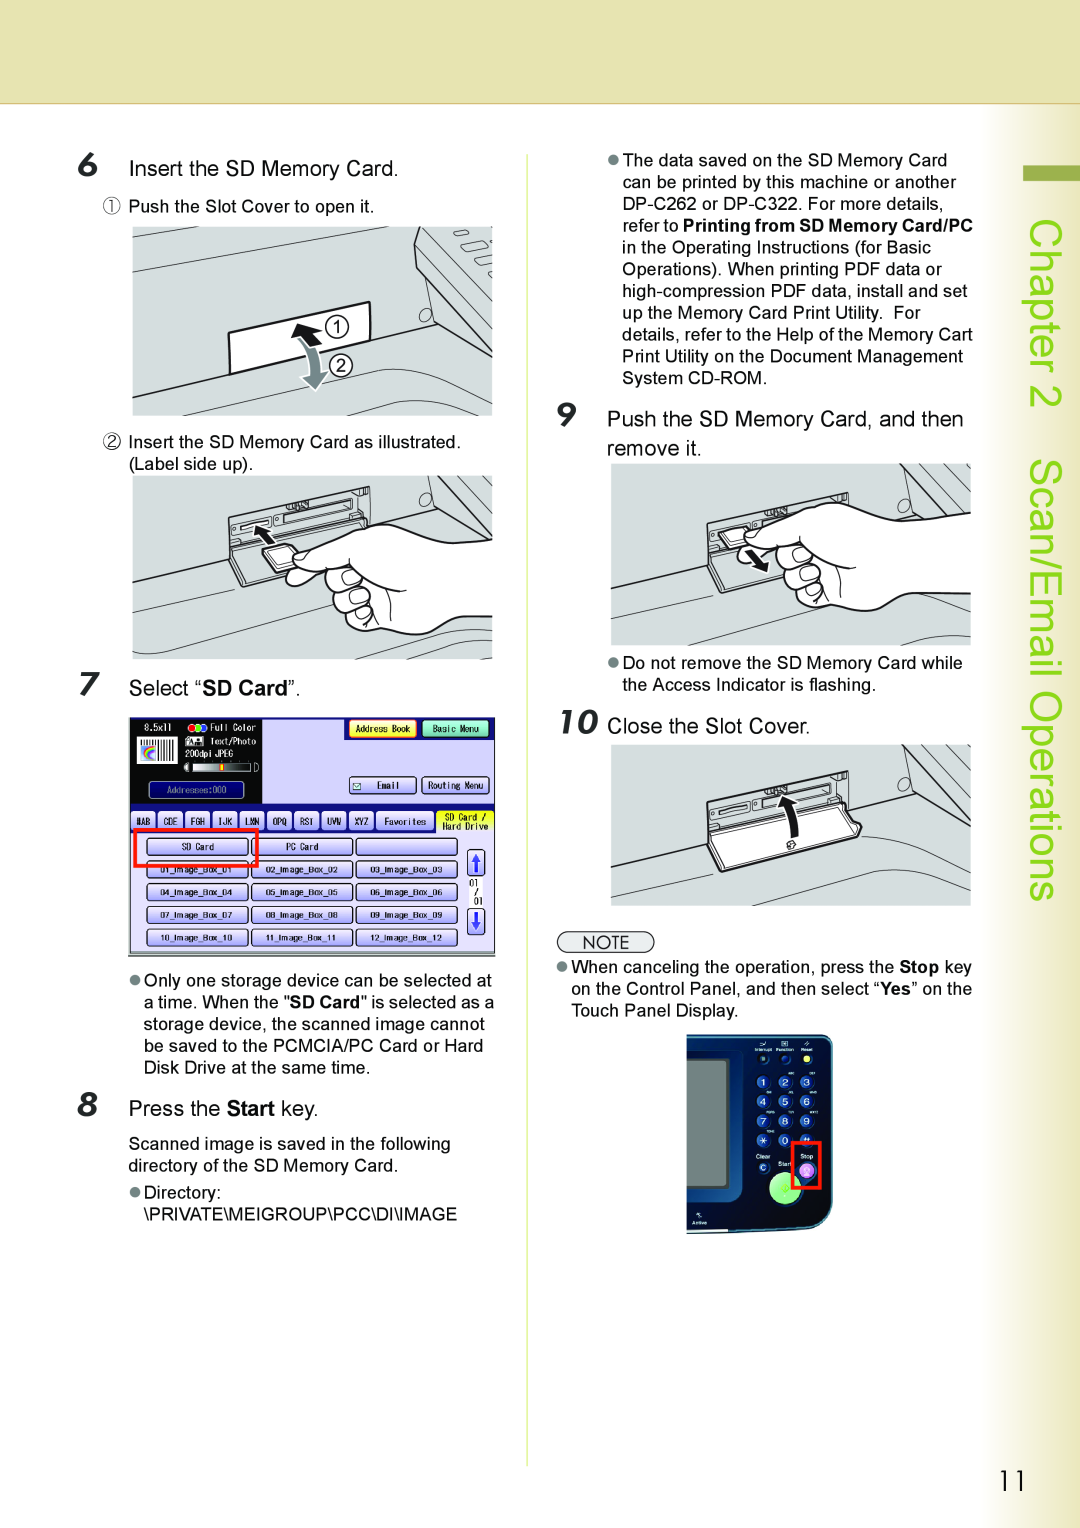 Philips DP-C262 manual Scan/Email, Insert the SD Memory Card, Select “SD Card”, Press the Start key, remove it 